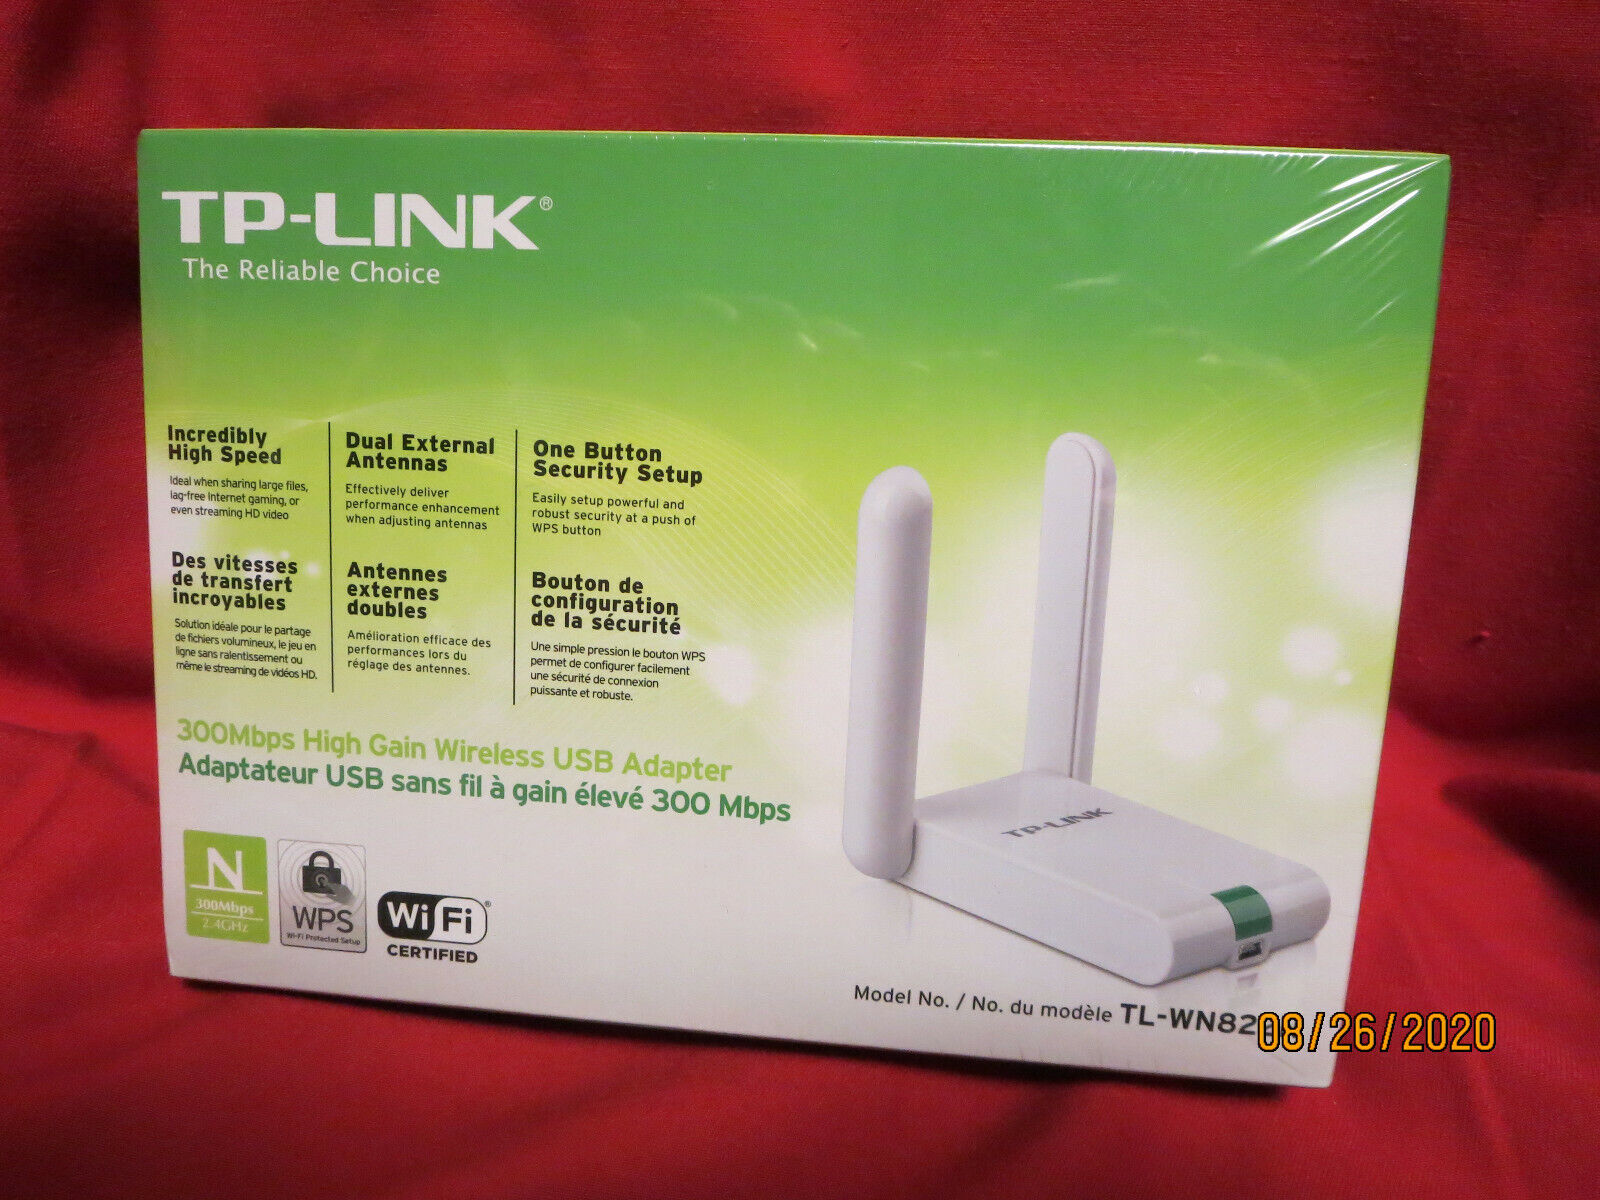 TP-LINK TL-WN822N 300Mbps HIGH GAIN WIRELESS ADAPTER BRAND NEW FACTORY SEALED